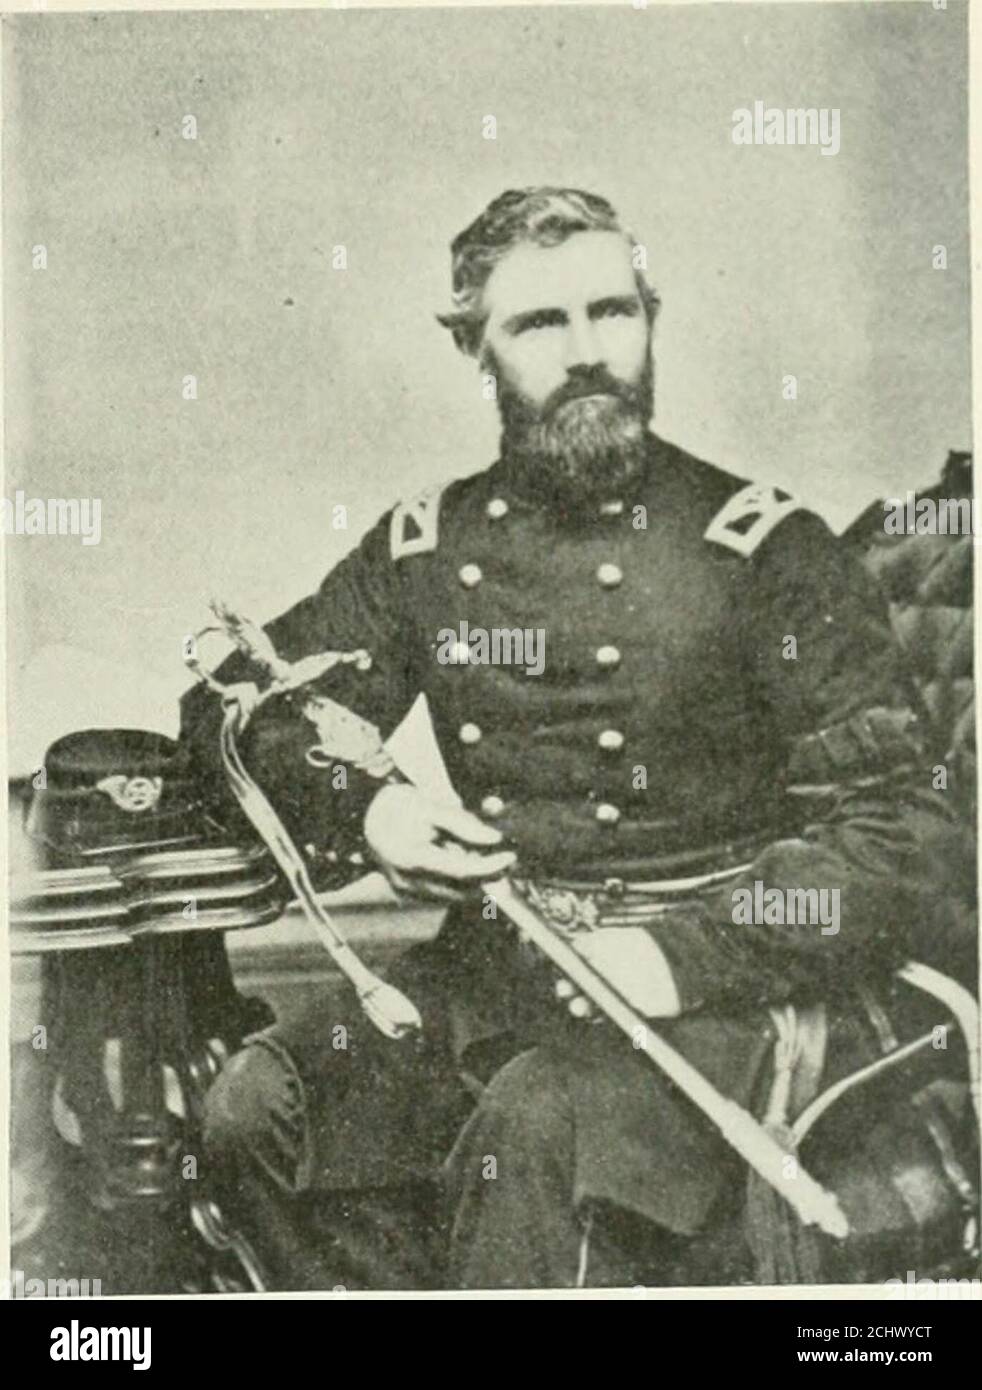 . Fitchburg past and present . GEN. JOHN W. KIMBALL. Born in Fitchburg Feb. 27. 1828. Enlisted in Fusiliers Sept. 18. 1846.Captain of and took Fusiliers as Co. B. Fifteenth Regt,. into U. S. serviceJune 28, 61. Major Aug. I. 1861 : Lieut. CoL April 29, 62: Colonel 53dRegt Nov. 10, 62 : Brevet Brig. Gen. U. S. V, March 13. 65. Selectman,assessor, tax collector: alderman77: postmaster79-87: representative64. 65. 72. 88-91 : State auditor 92-1900. U.S.pension agent73-77 :custodian Bureau Engraving and Printing, Washington. 77-79. G.A. R..Mass. Dept.. Commander 1872. Loyal Legion. Society Army of Stock Photo